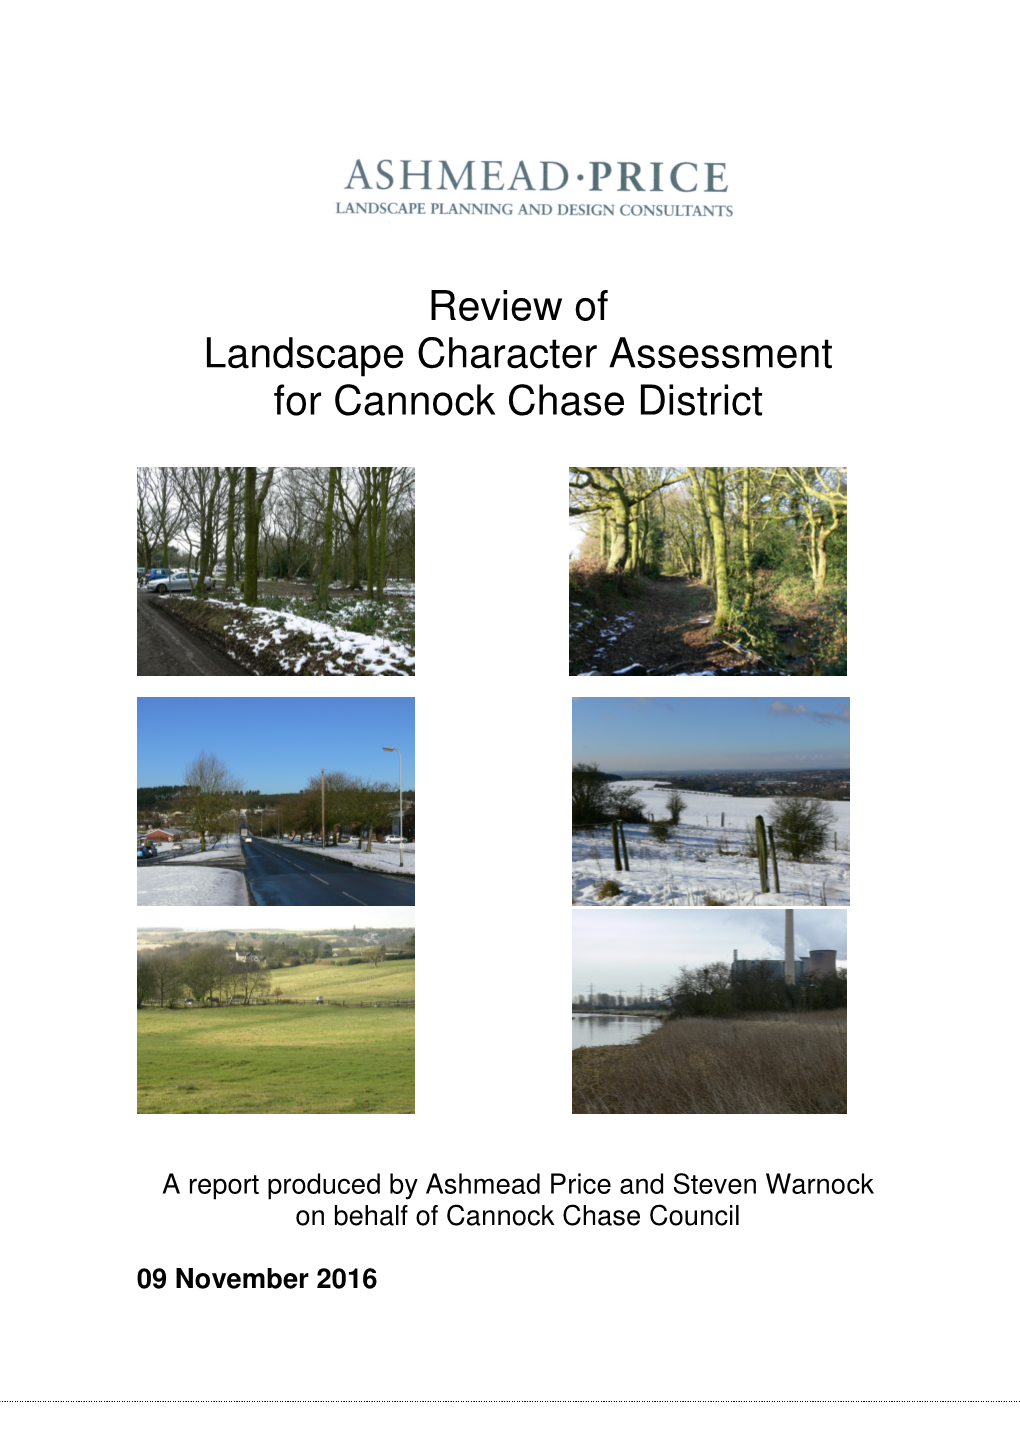 Landscape Character Assessment of Cannock Chase District